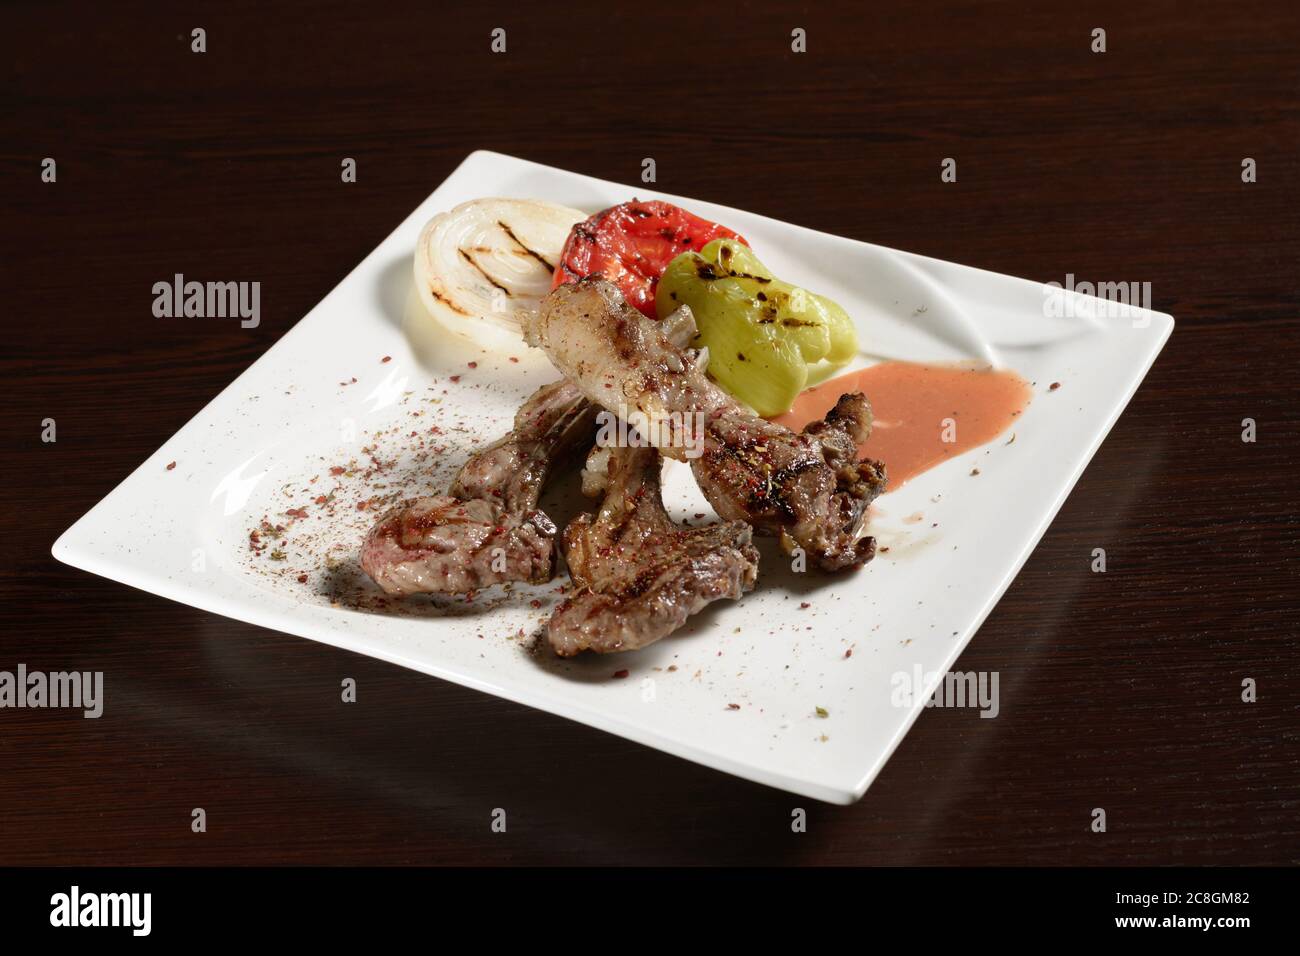 Вarbecue beef ribs with grilled vegetables of tomato, onion and bell pepper on a square plate on a wooden table. Photos for restaurant and cafe menus Stock Photo